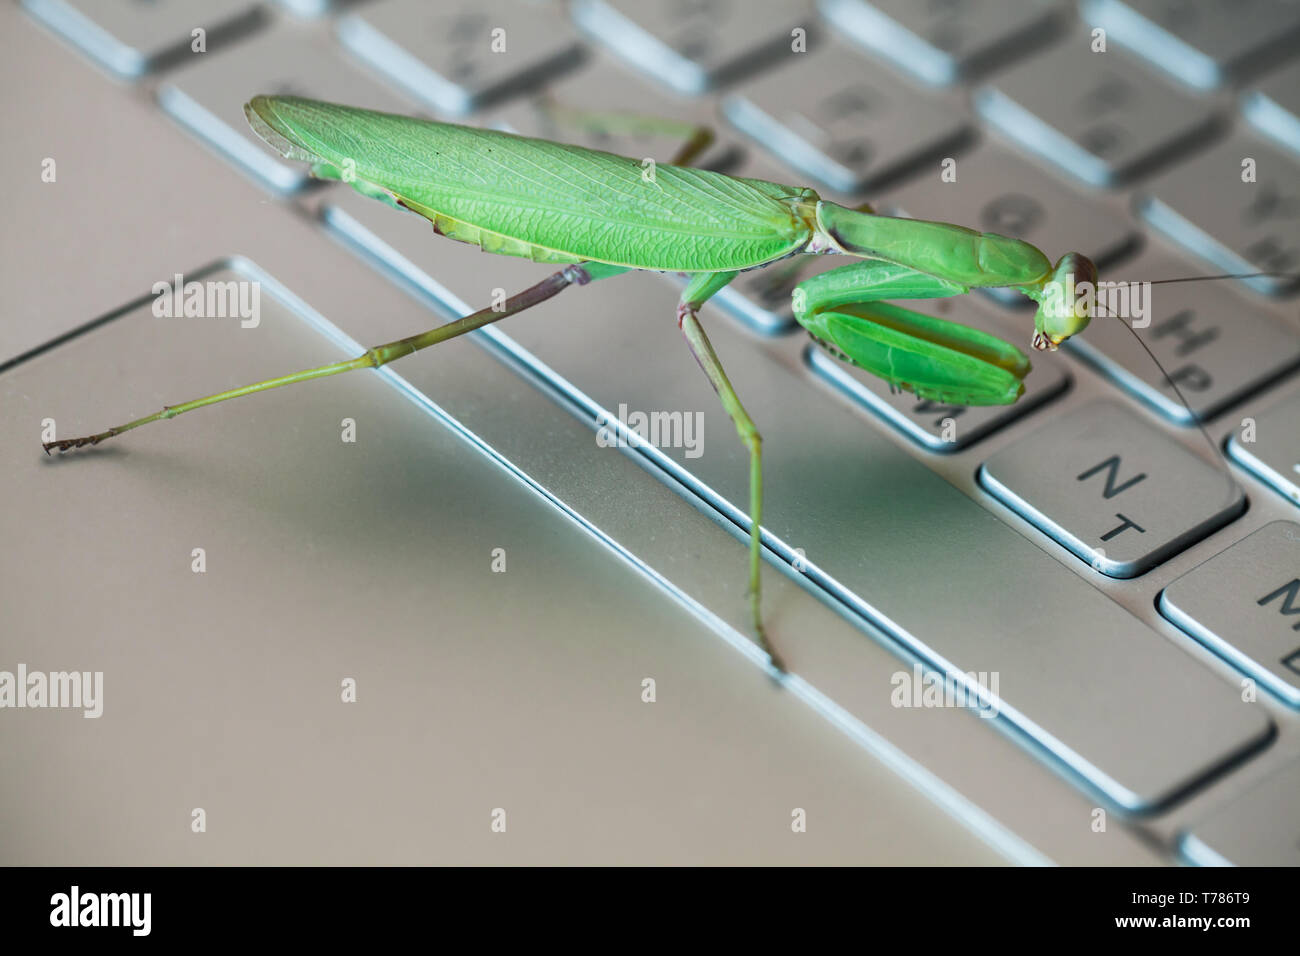 Software bug metaphor, green mantis is on a laptop keyboard with English and Russian letters Stock Photo